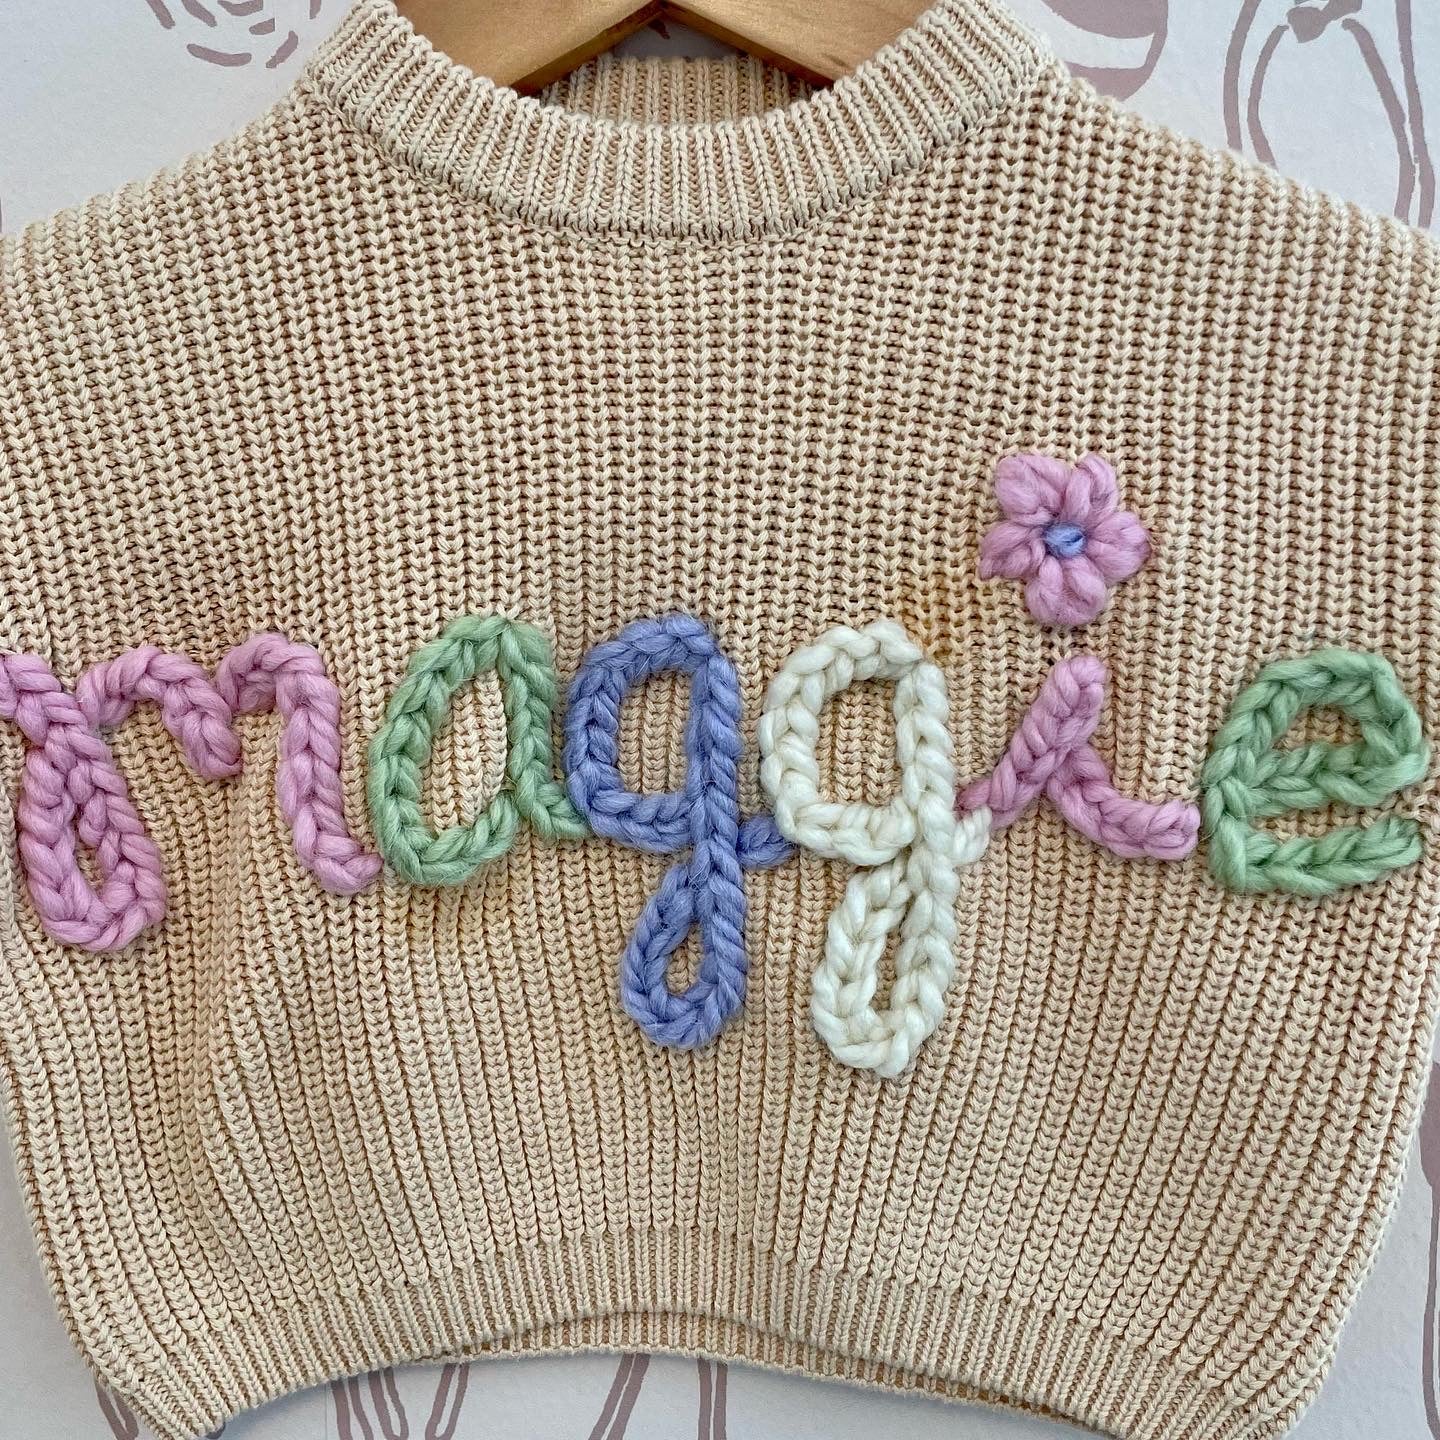 Embroidered Holographic Name Patch – Cee Bee Stitches